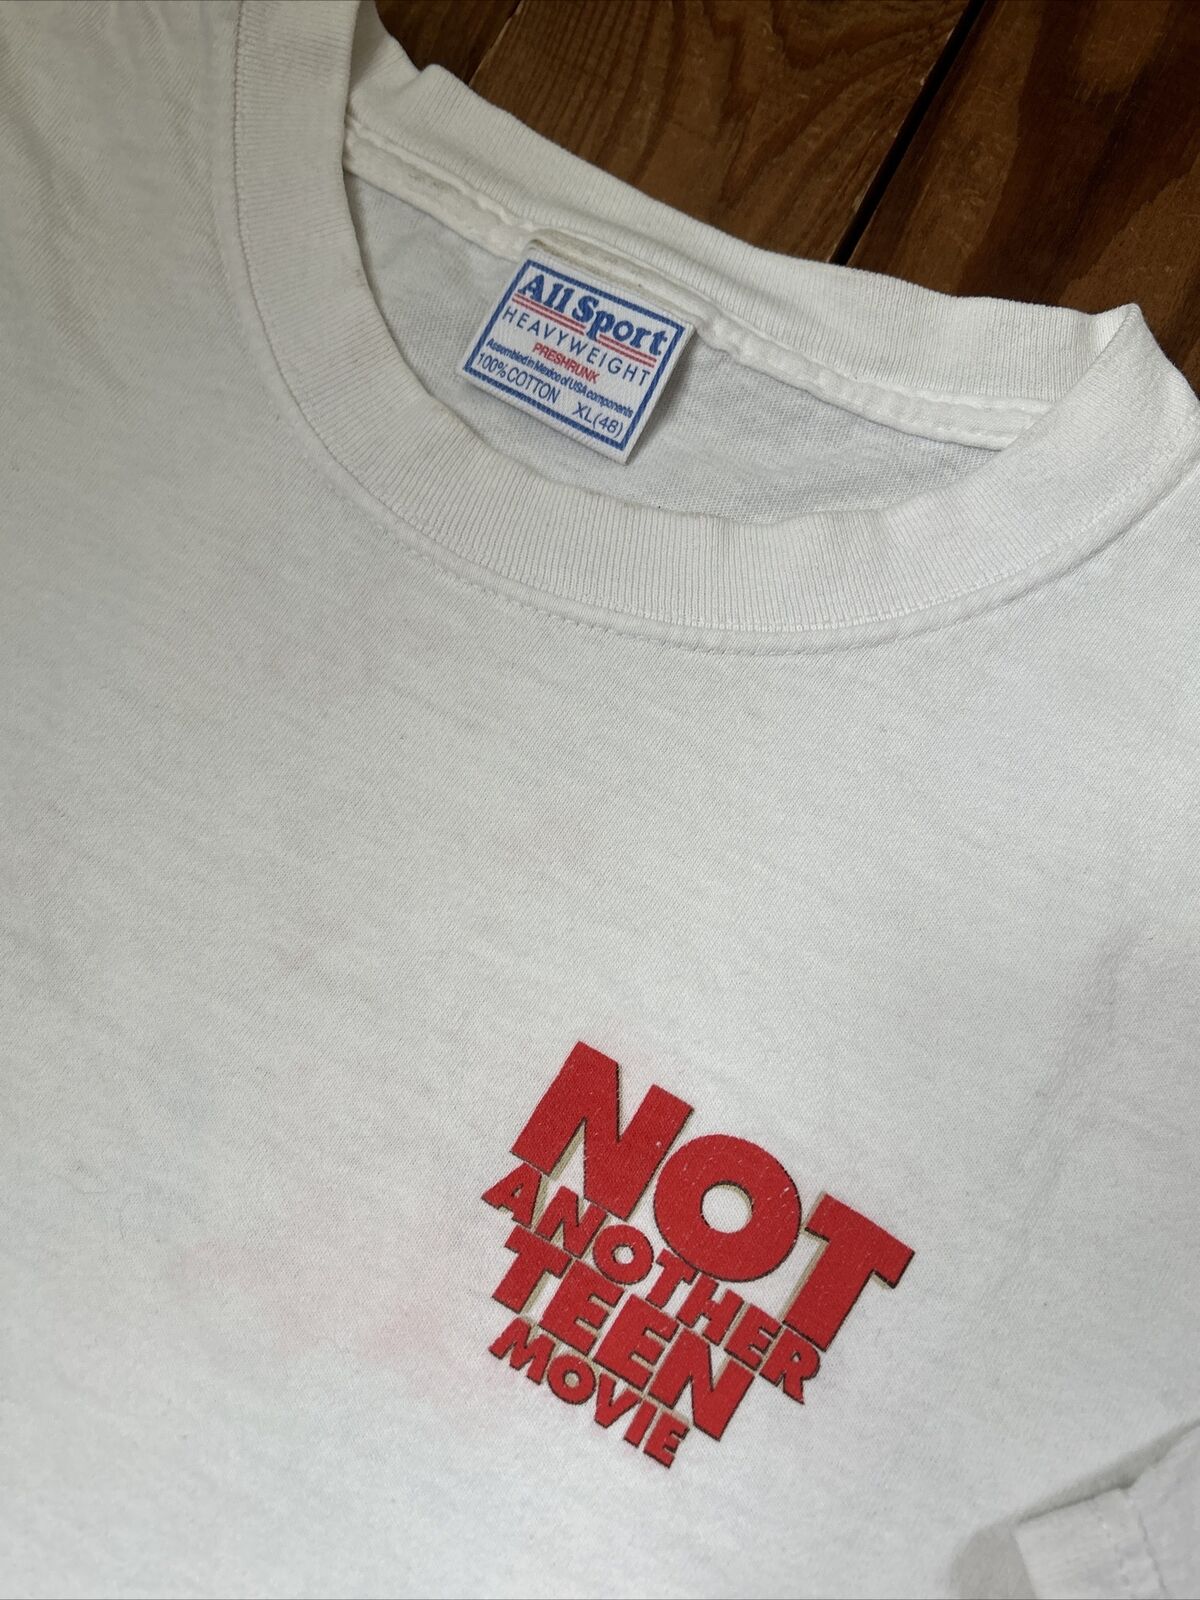 Vintage 2001 Not Another Teen Movie White Promo T-Shirt Size XL